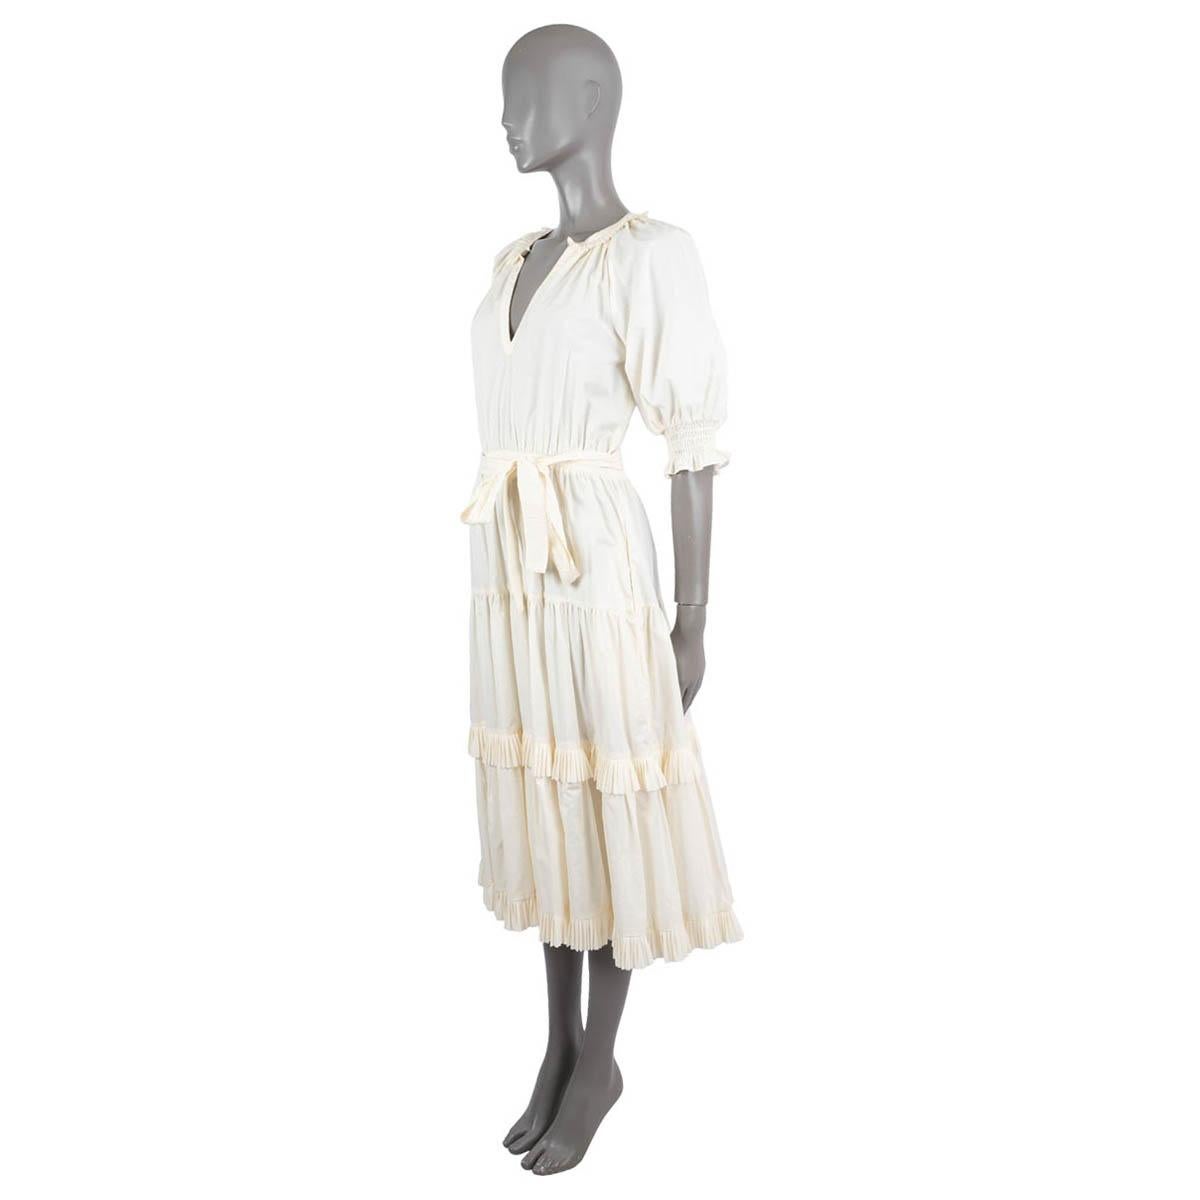 100% authentic Ulla Johnson Dasha tiered midi dress in ivory cotton poplin (100%). Features a V-neck with ruffled collar, shirred short puff sleeves, an elastic waist with self-tie belt, slit side pockets and fluttery skirt thats tiered and ruffled.